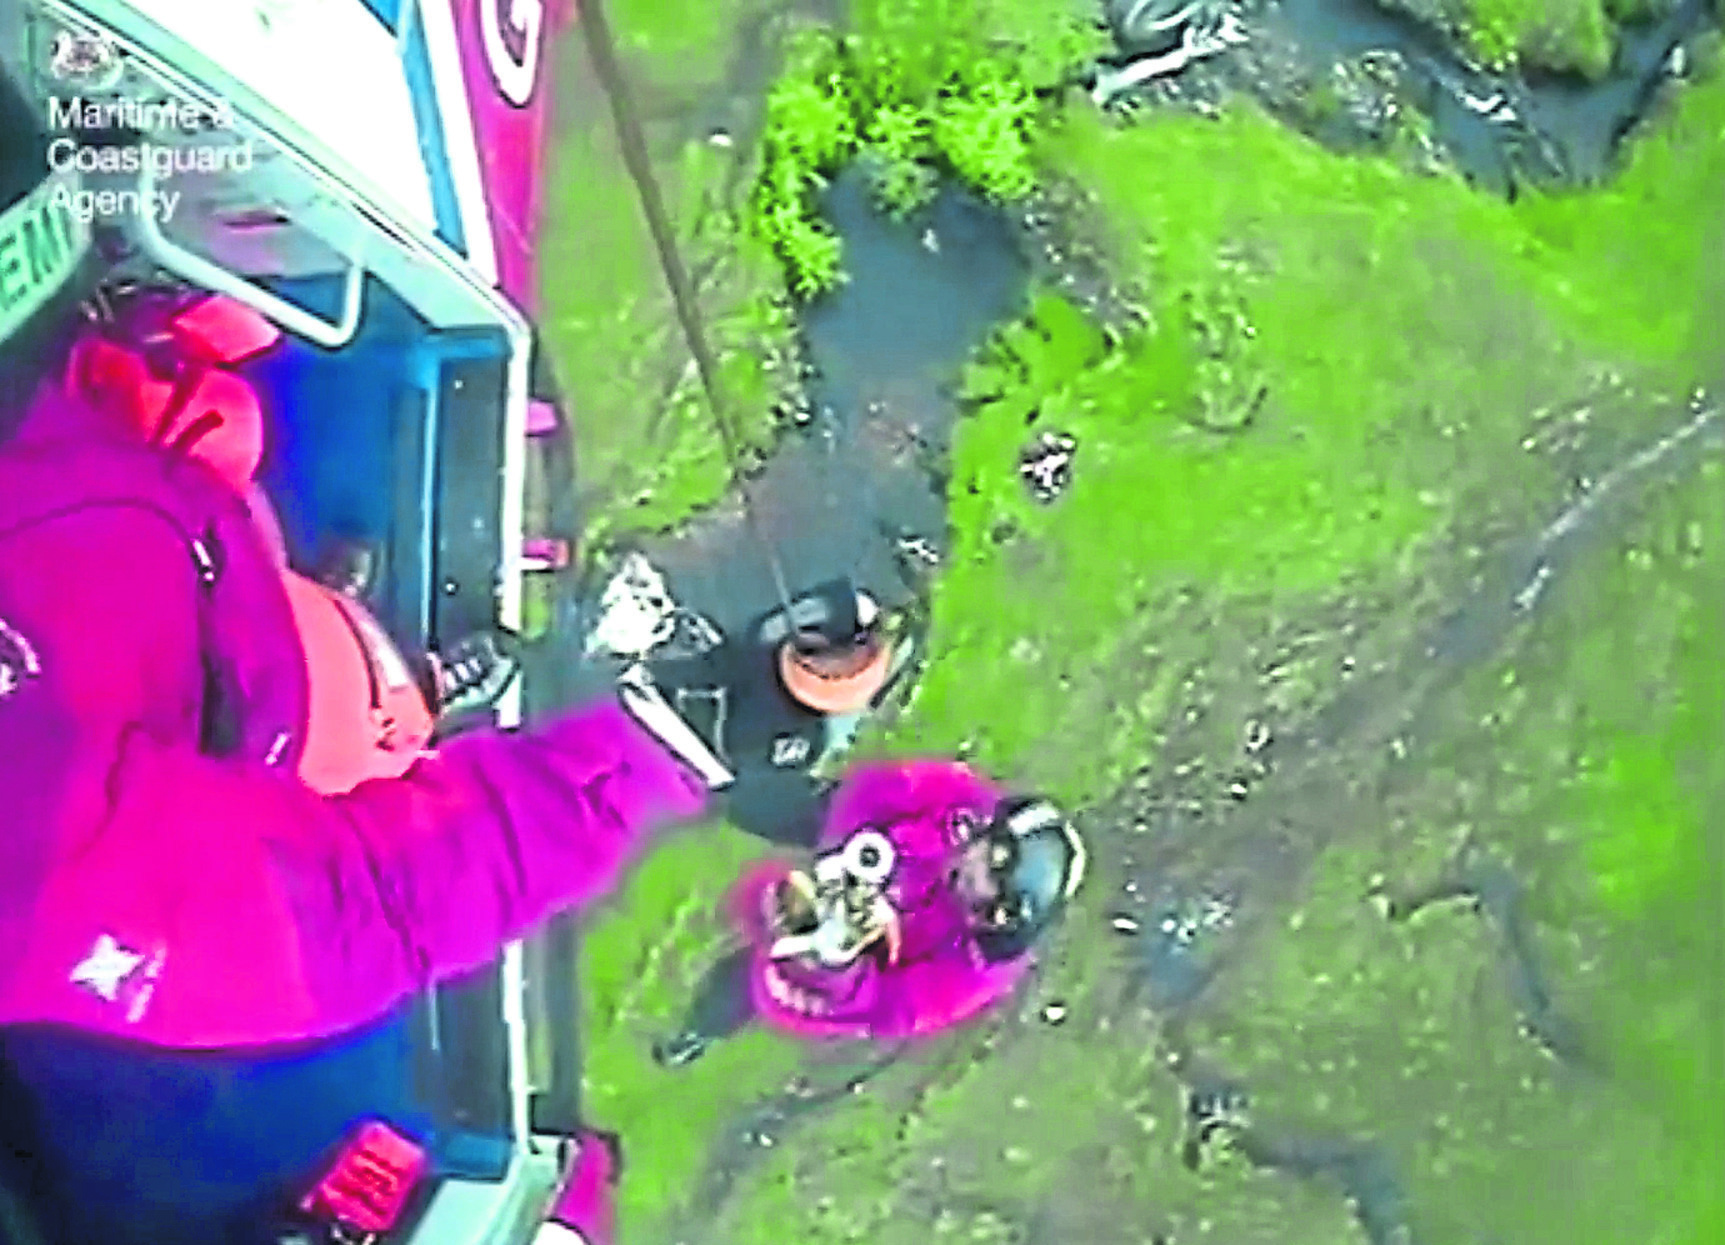 A teenager was also winched to safety from a river gorge near Ben Nevis